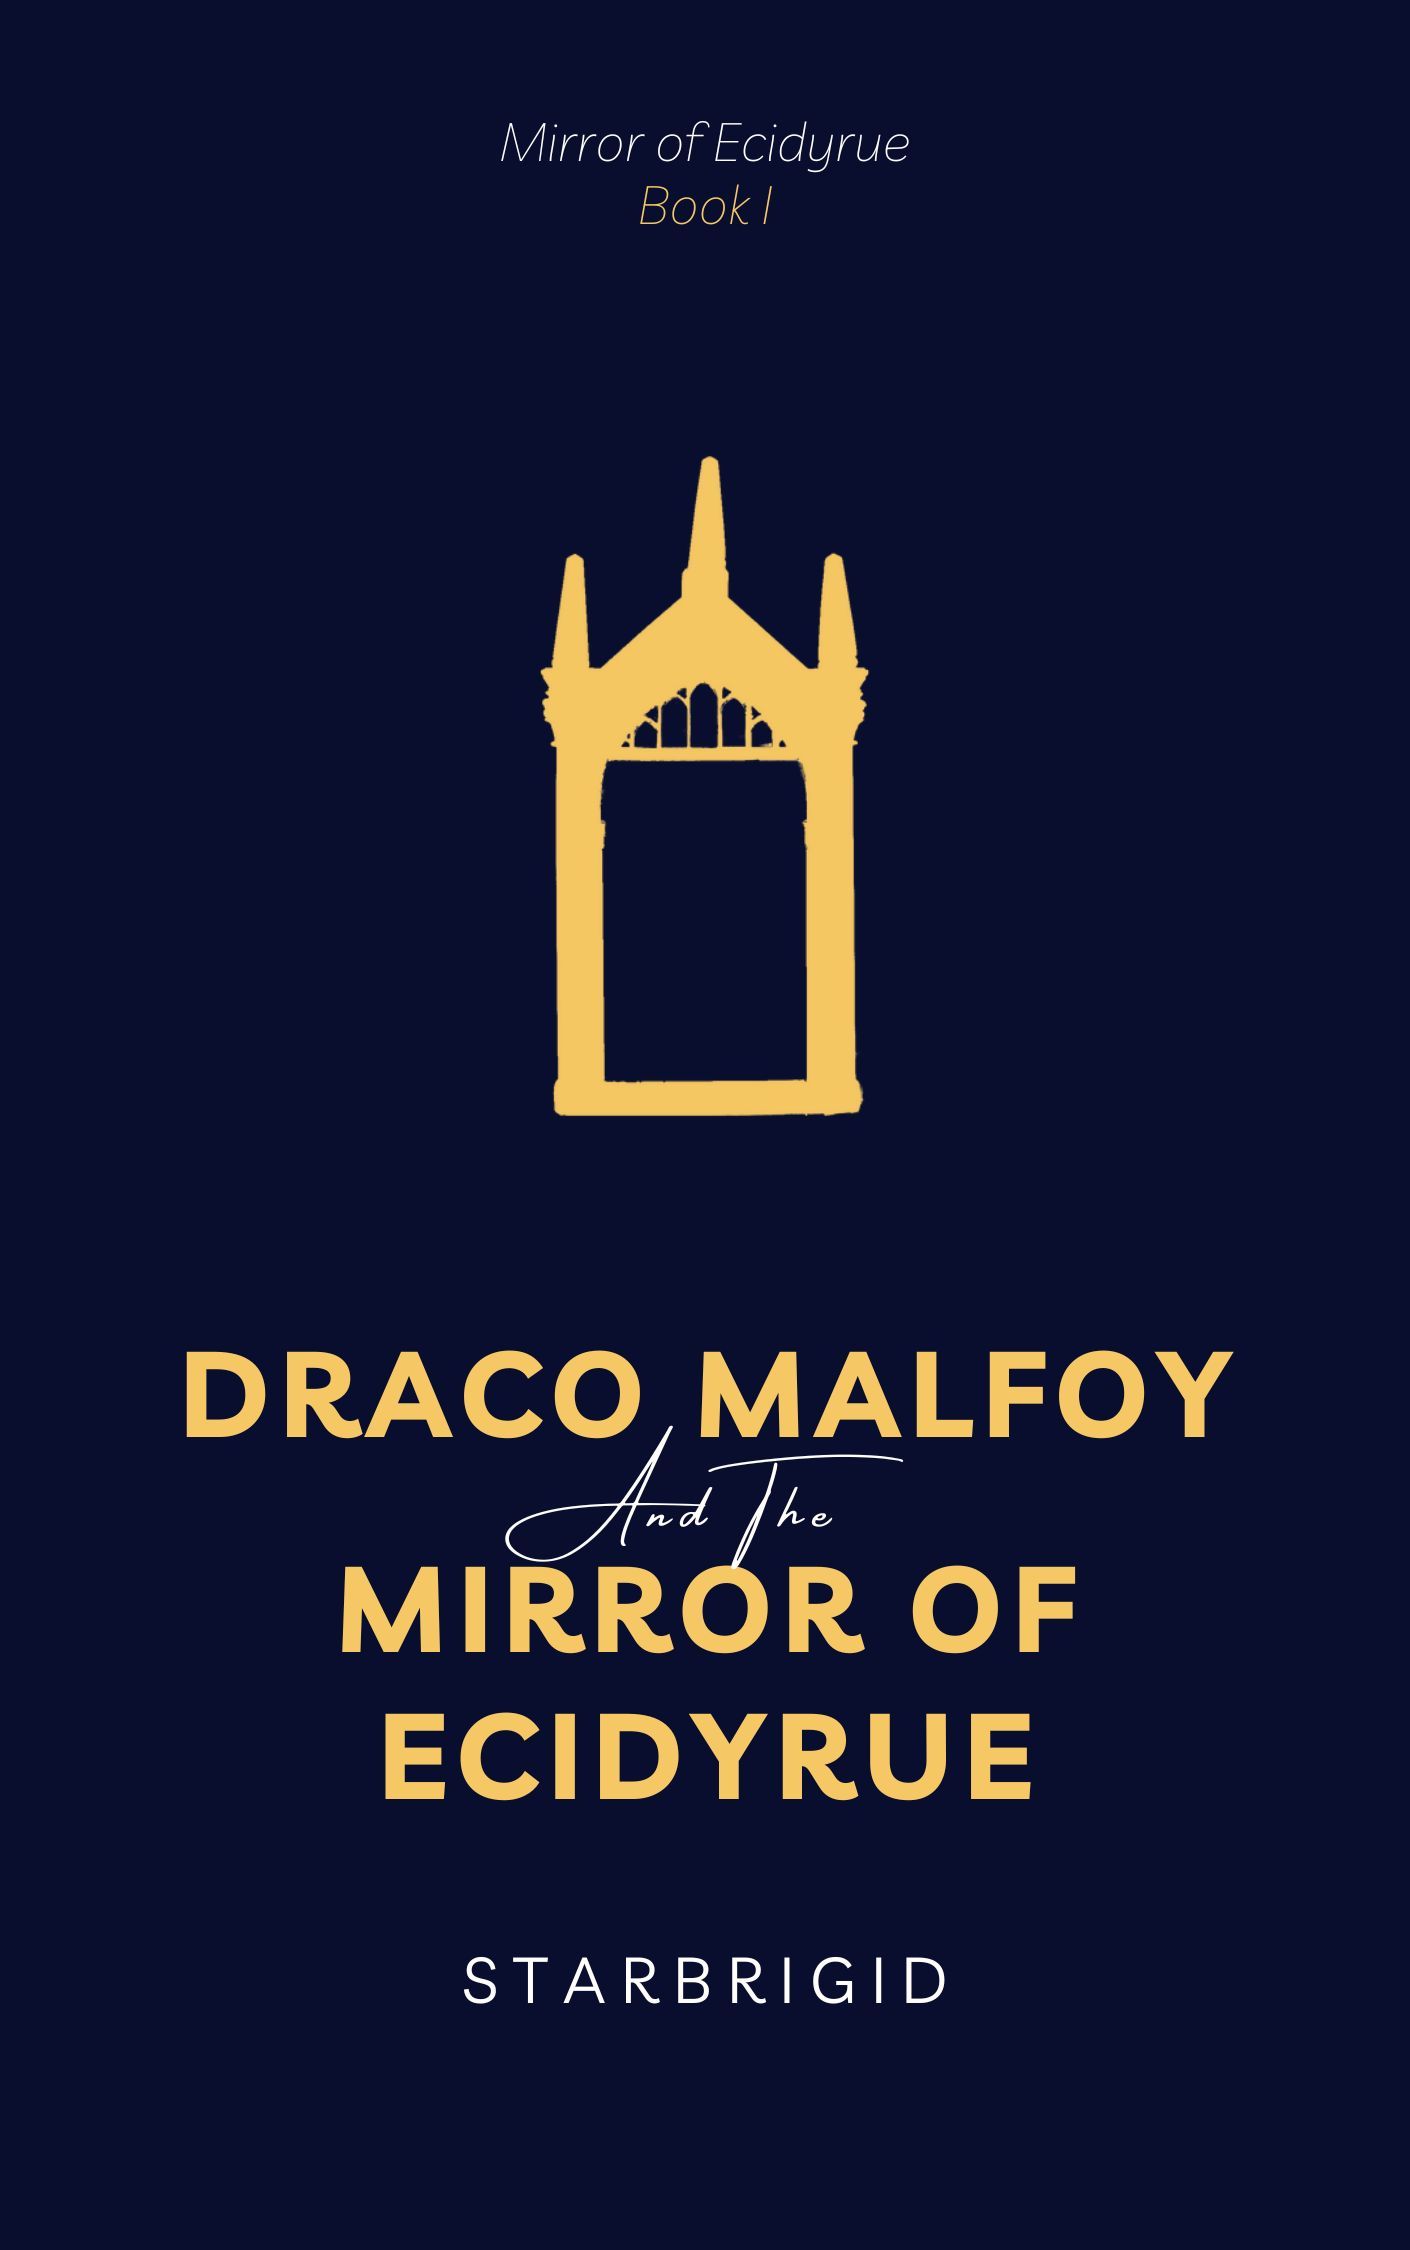 Cover of Draco Malfoy and the Mirror of Ecidyrue.